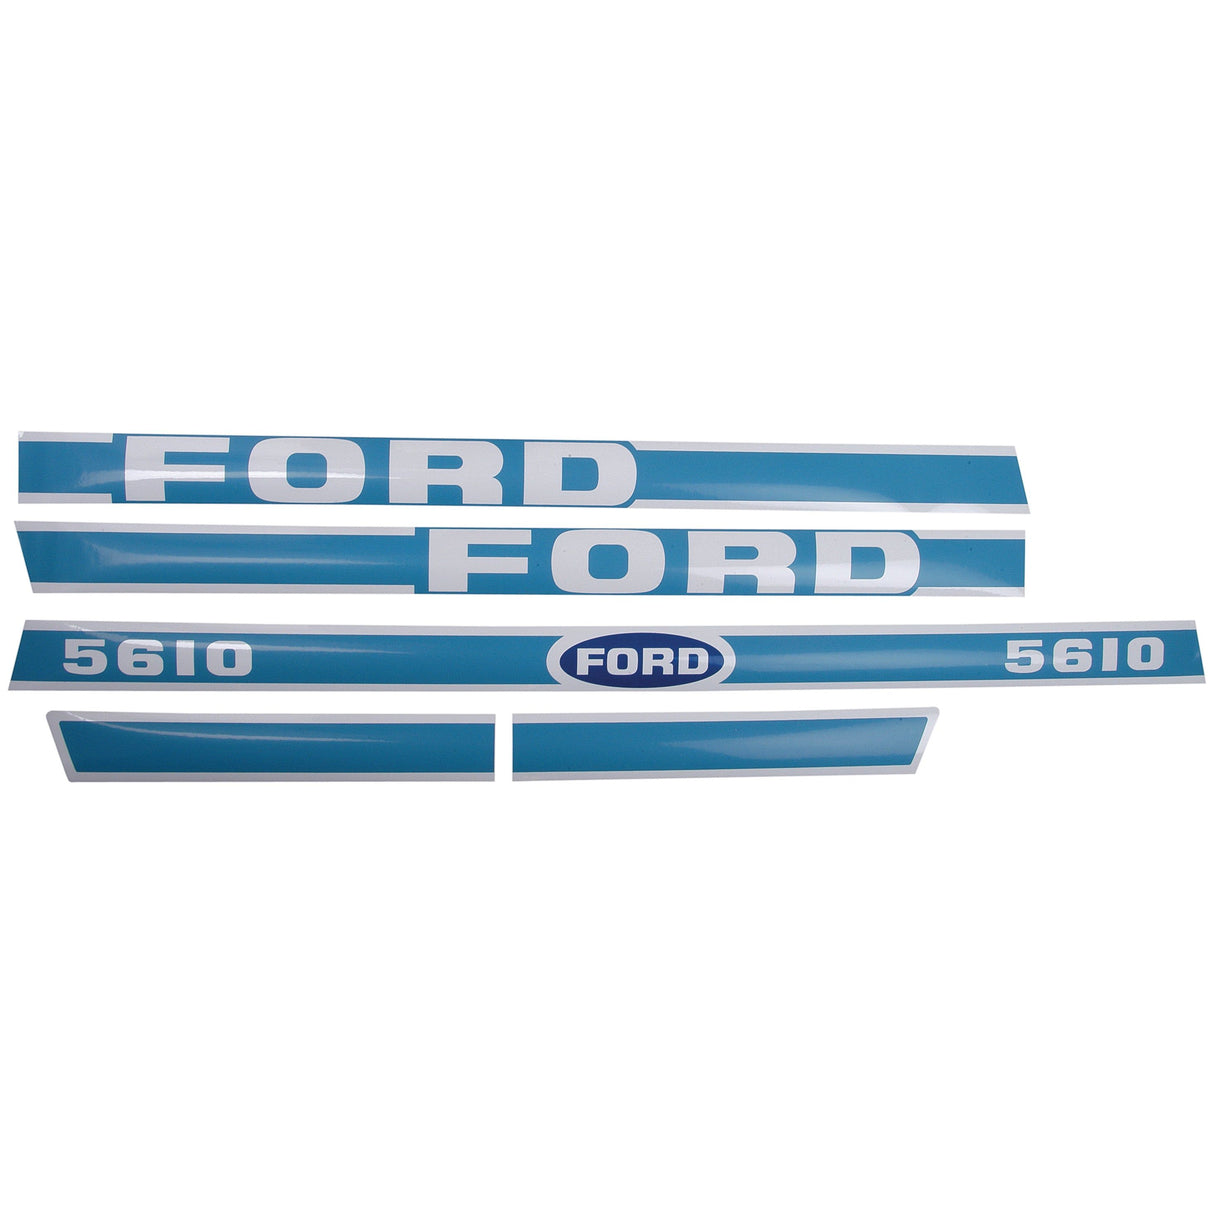 Decal Set - Ford / New Holland 5610
 - S.8430 - Farming Parts